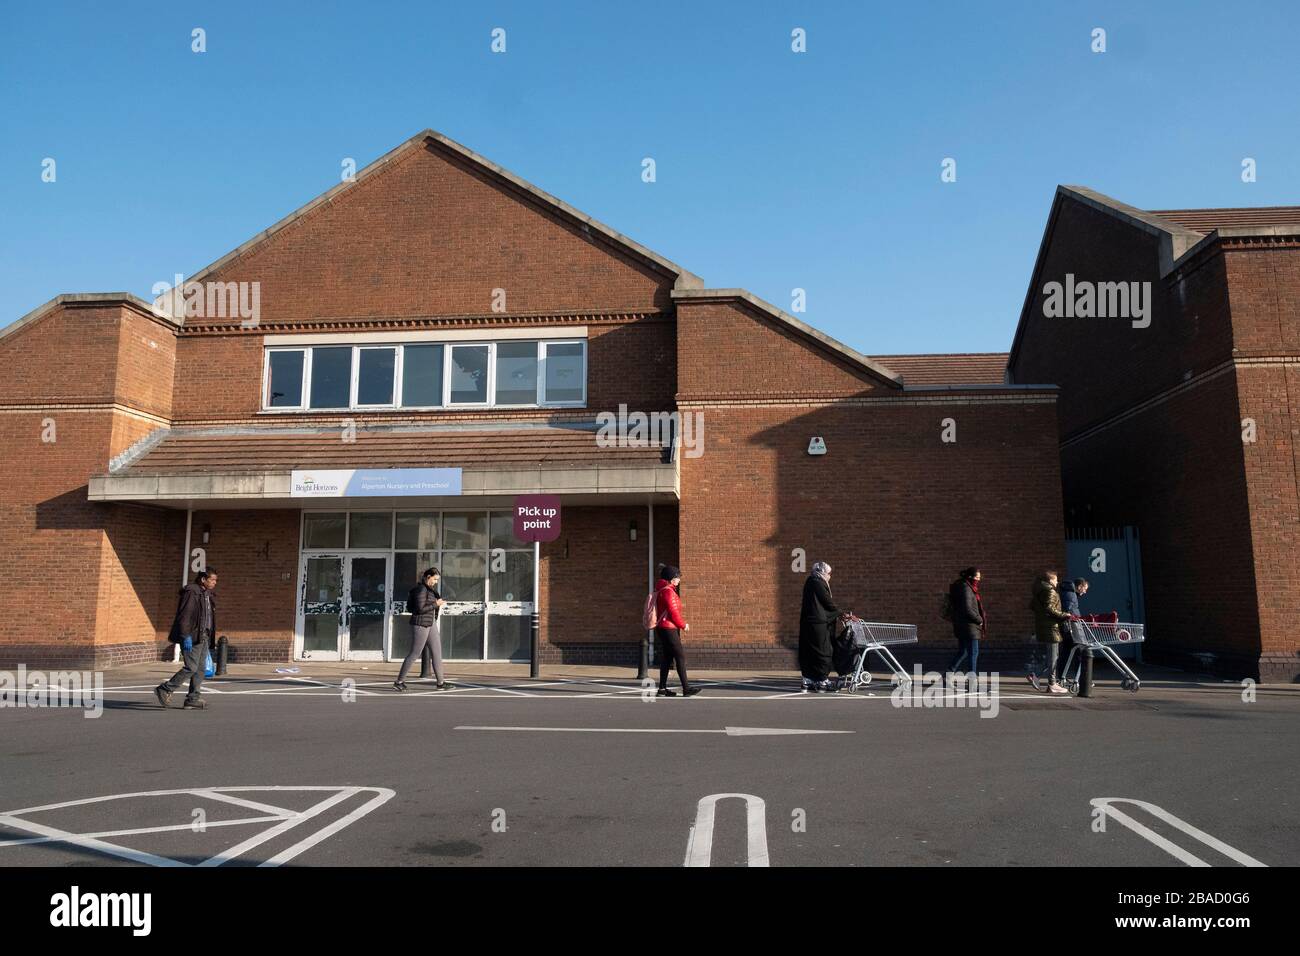 London, UK. 26th Mar, 2020. Customers queue outside a supermarket observing two metres social distancing in London, Britain on March 26, 2020. The British government said on Thursday that the number of confirmed COVID-19 cases in the country has risen to 11,658 as single-day deaths topped 100 for the first time since the outbreak of the disease. Credit: Ray Tang/Xinhua/Alamy Live News Stock Photo